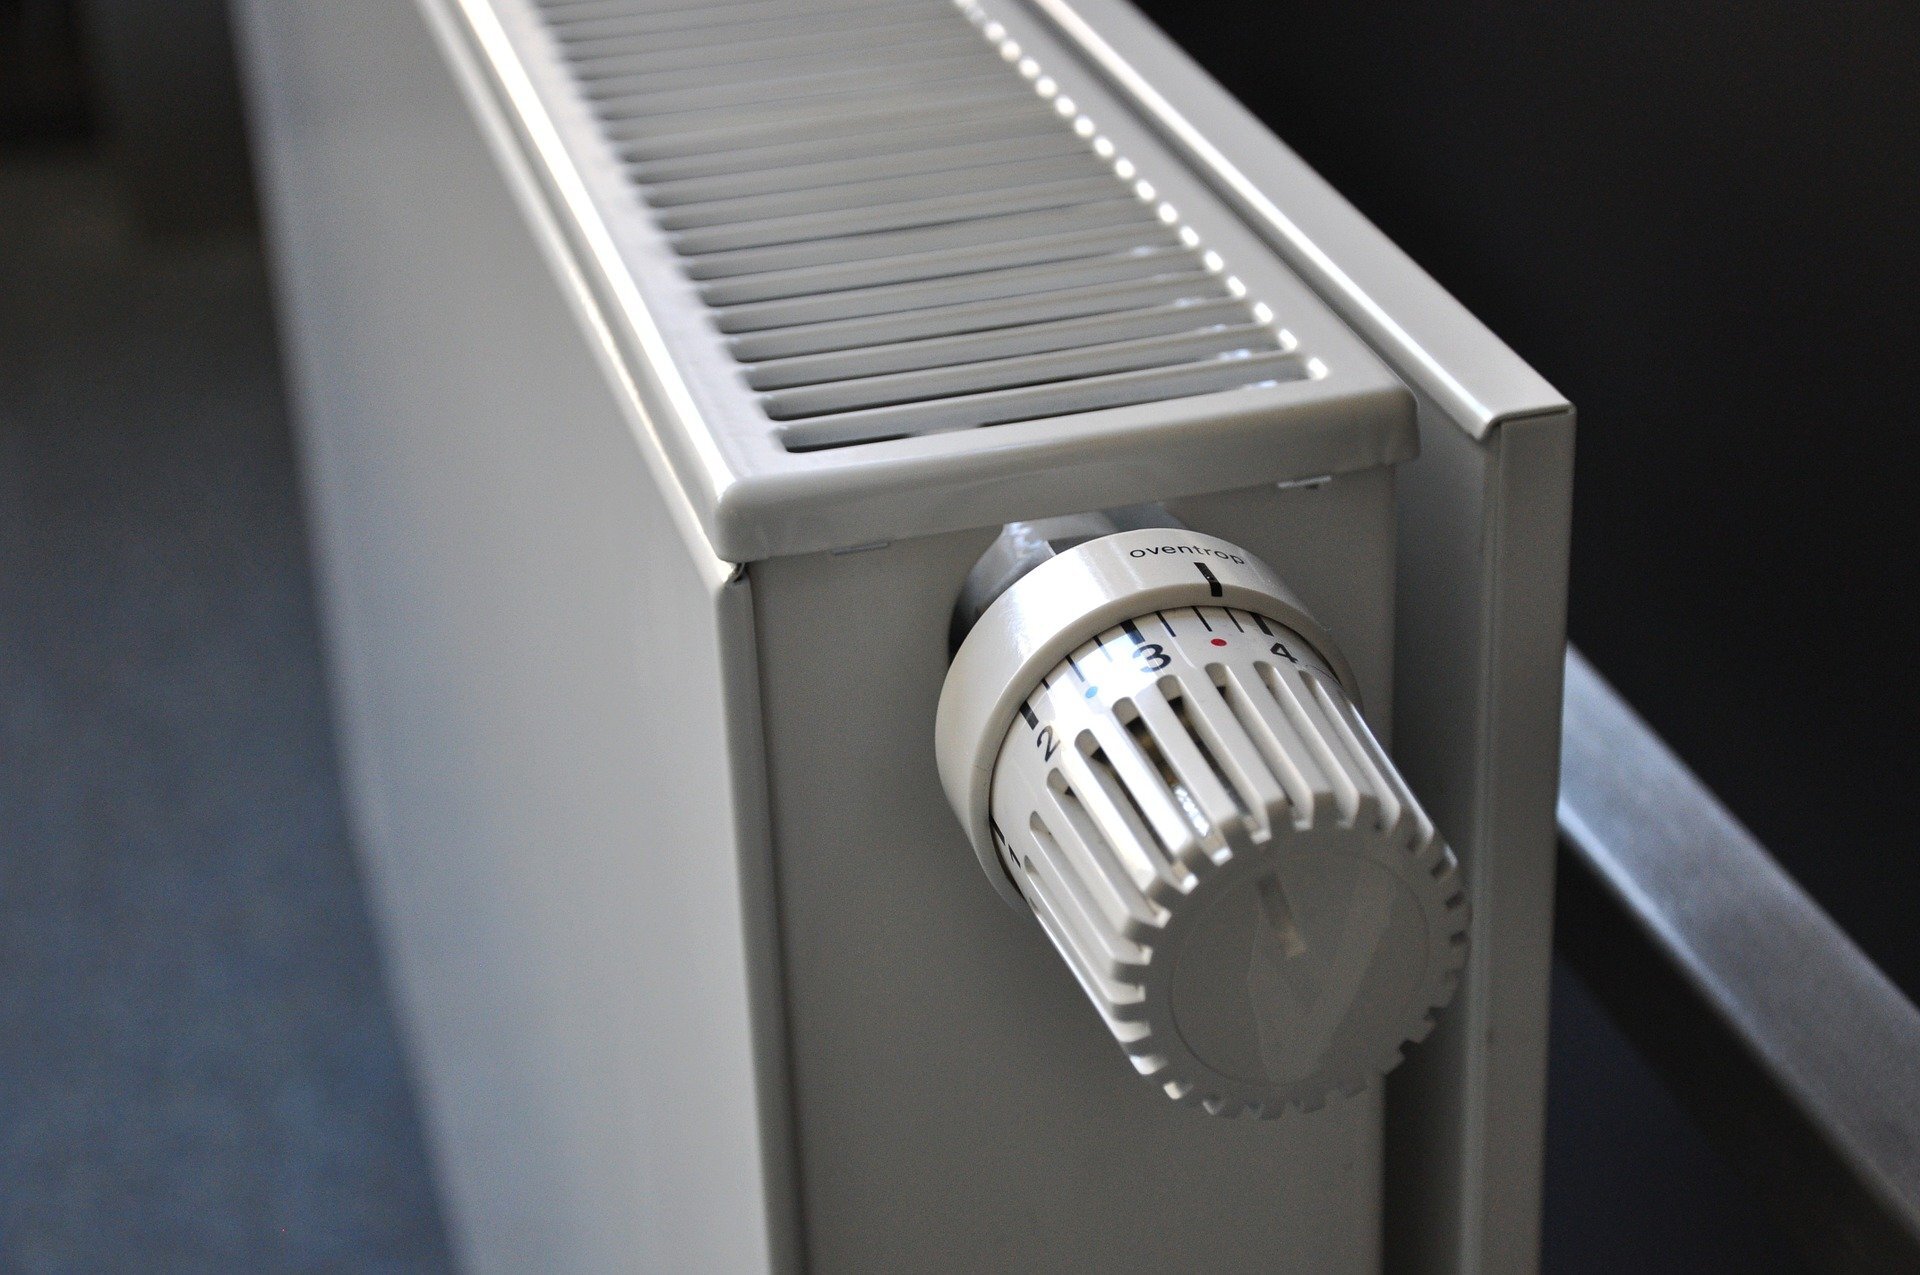 Radiator as an example of heating system in buildings.